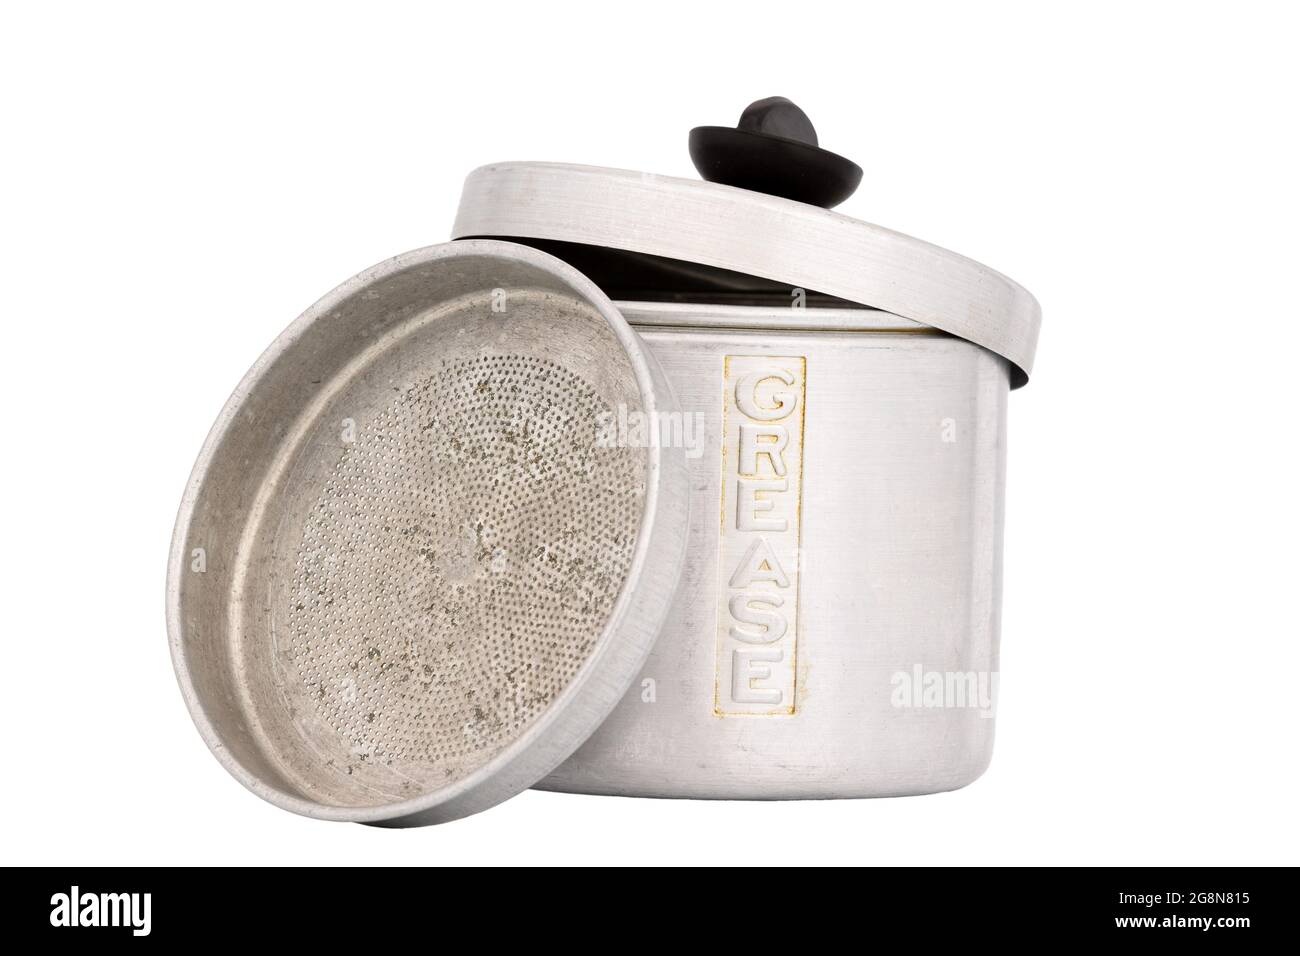 https://c8.alamy.com/comp/2G8N815/antique-grease-container-with-strainer-2G8N815.jpg